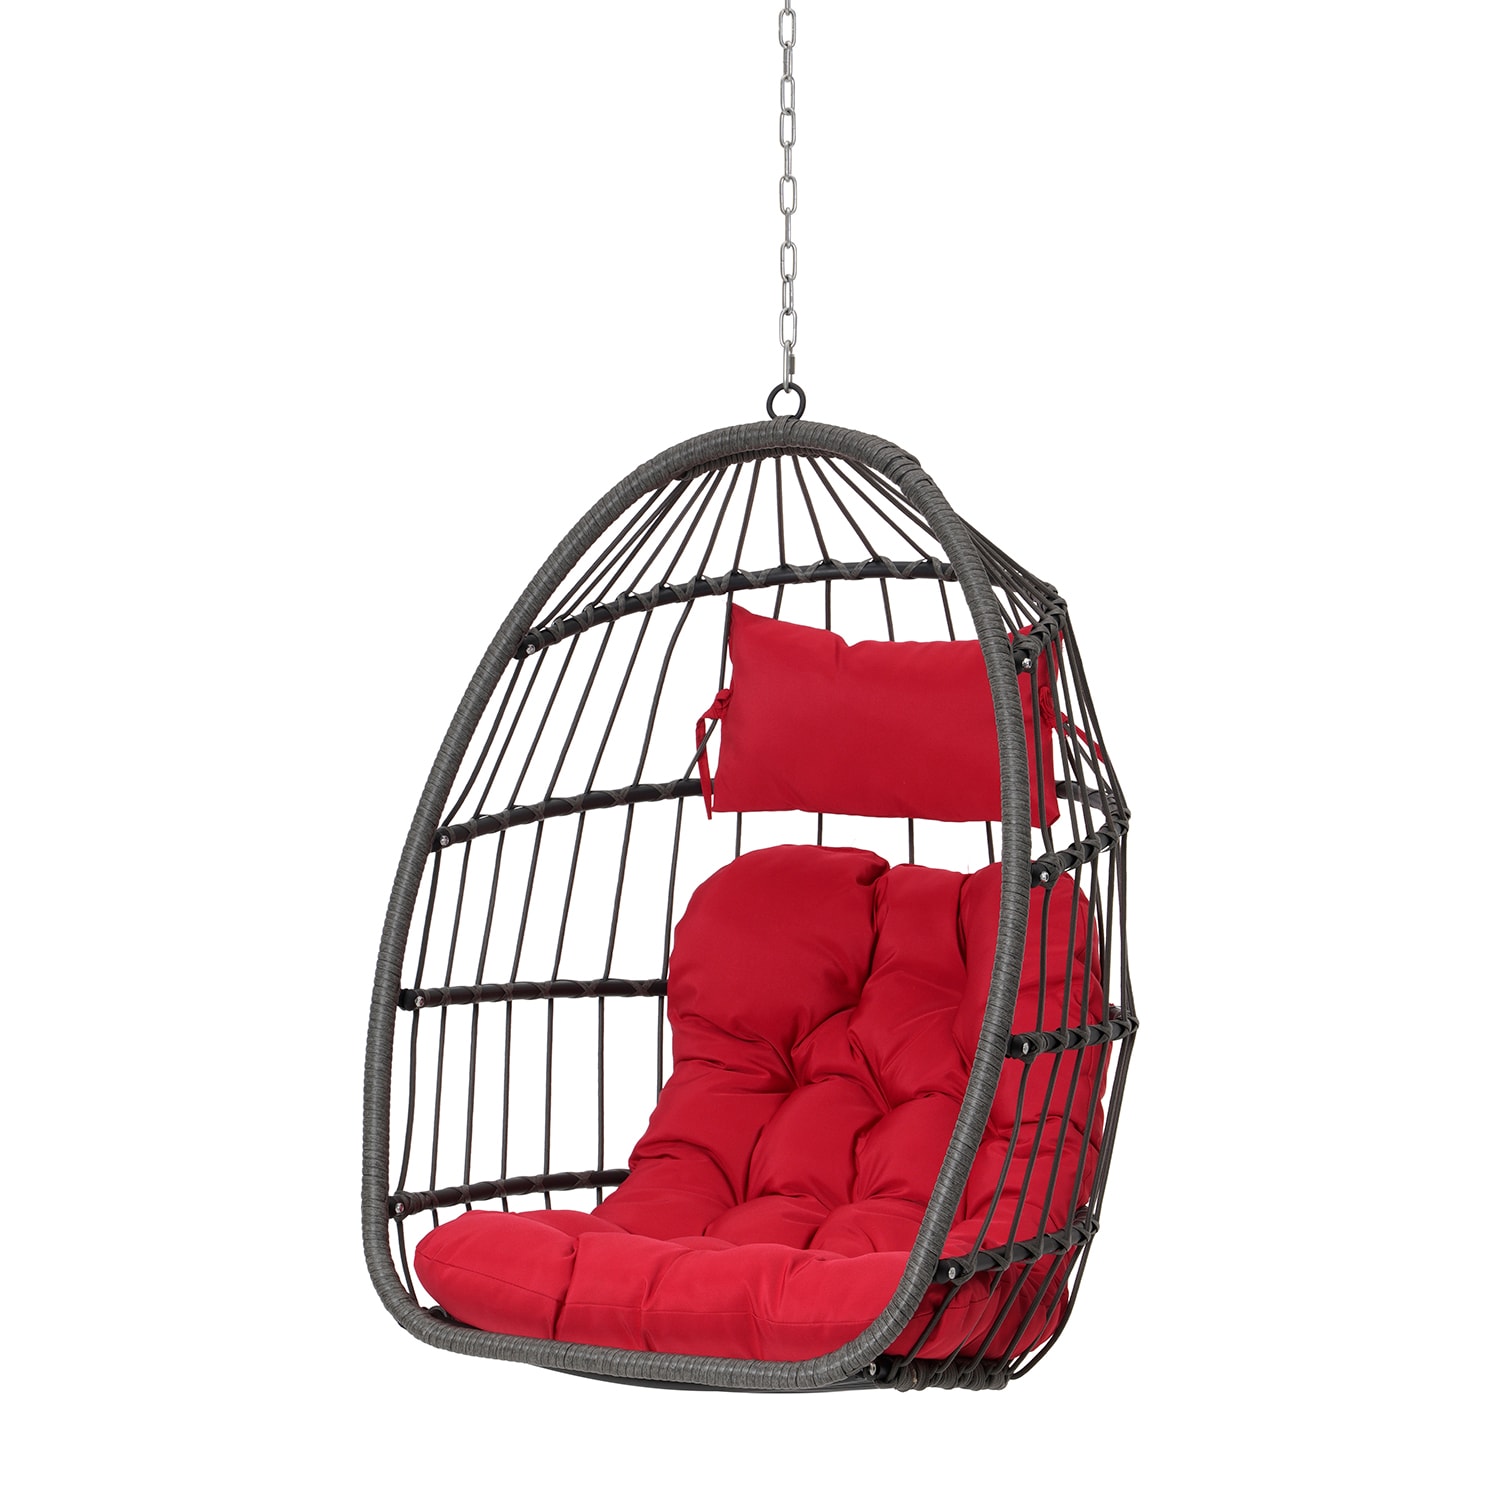 SINOFURN Wicker Brown Rattan Frame Hanging Egg Chair with Red Cushioned ...